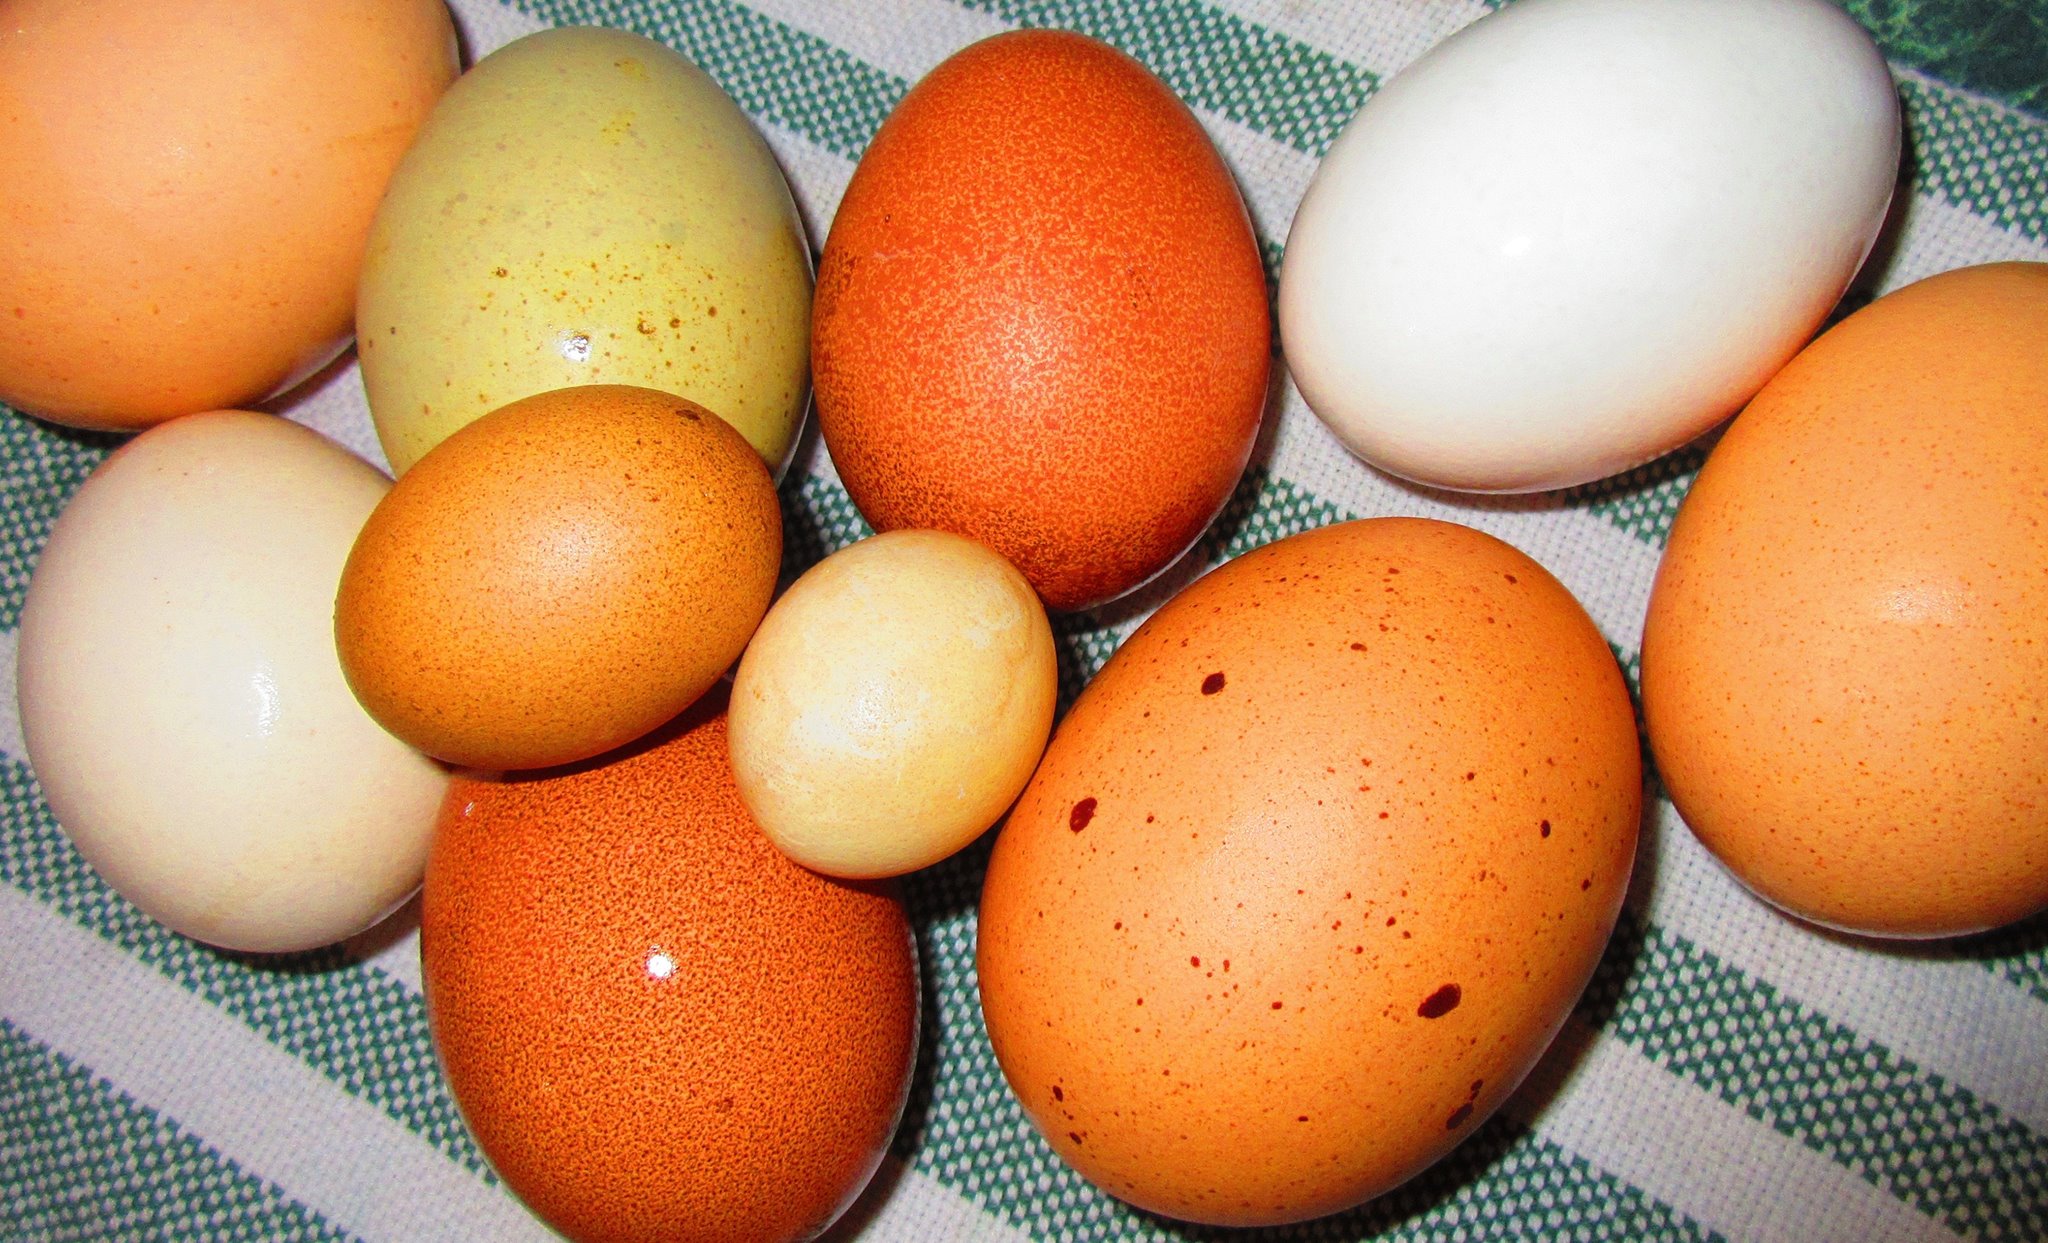 Eggs produced by Tina Nettles's backyard chickens